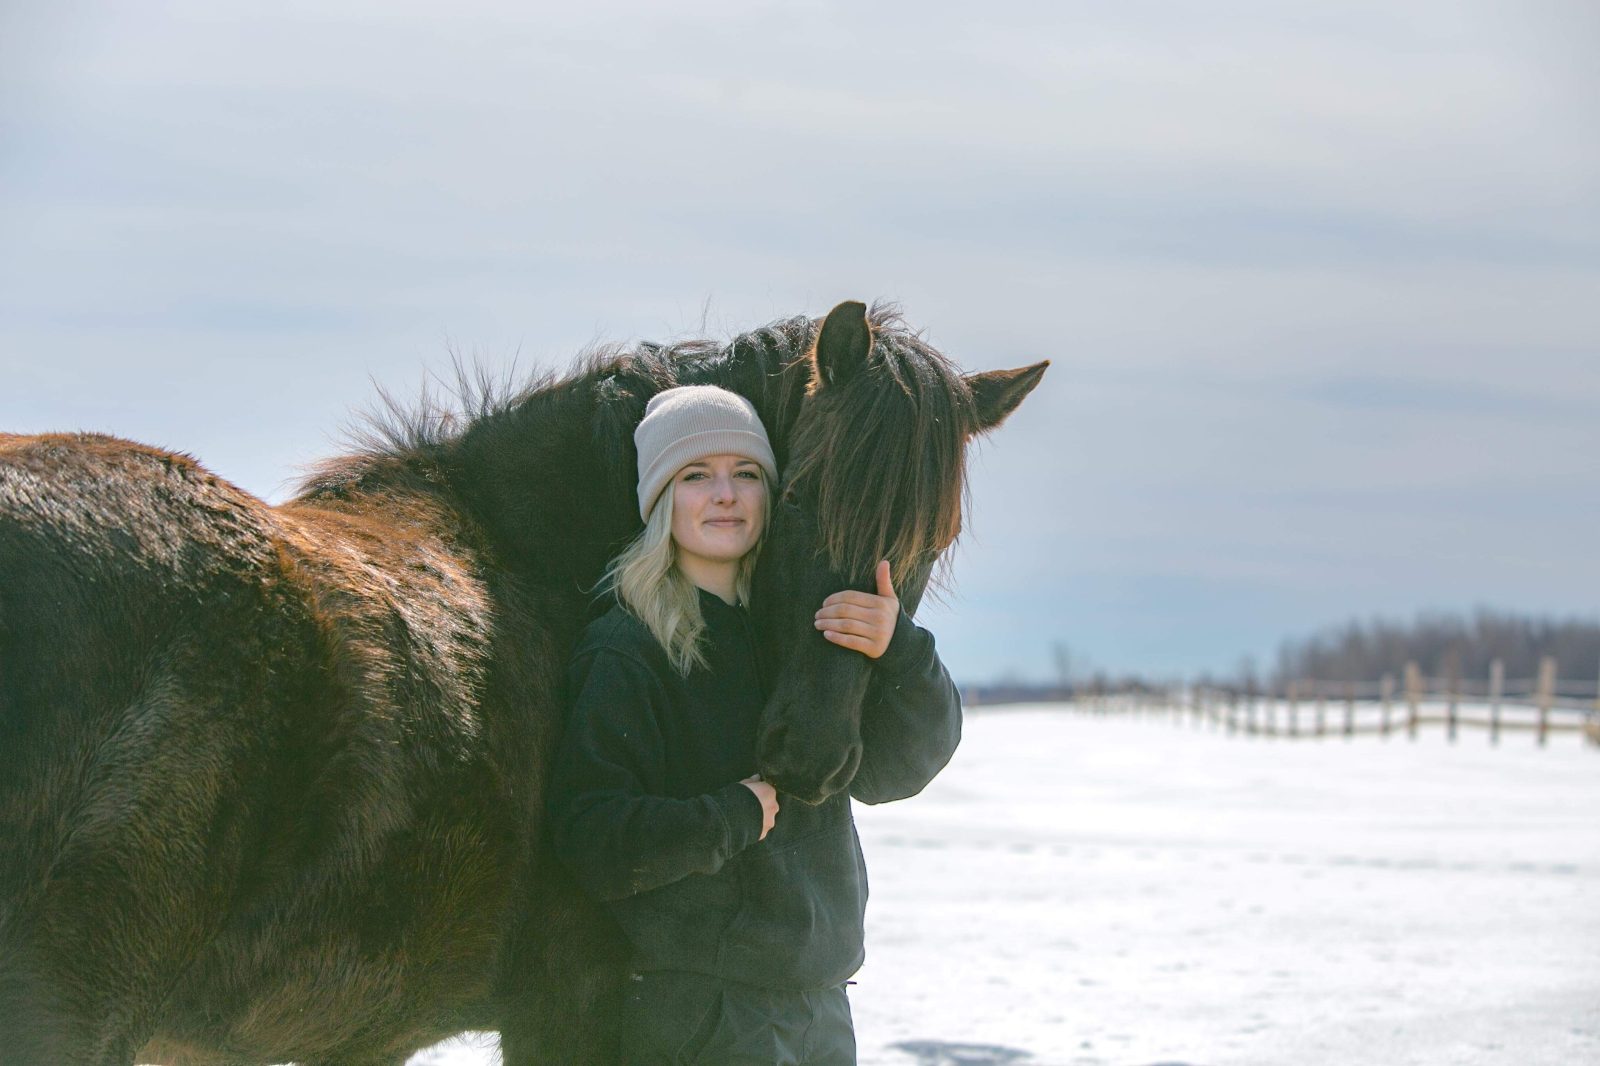 A safe home for horses in need